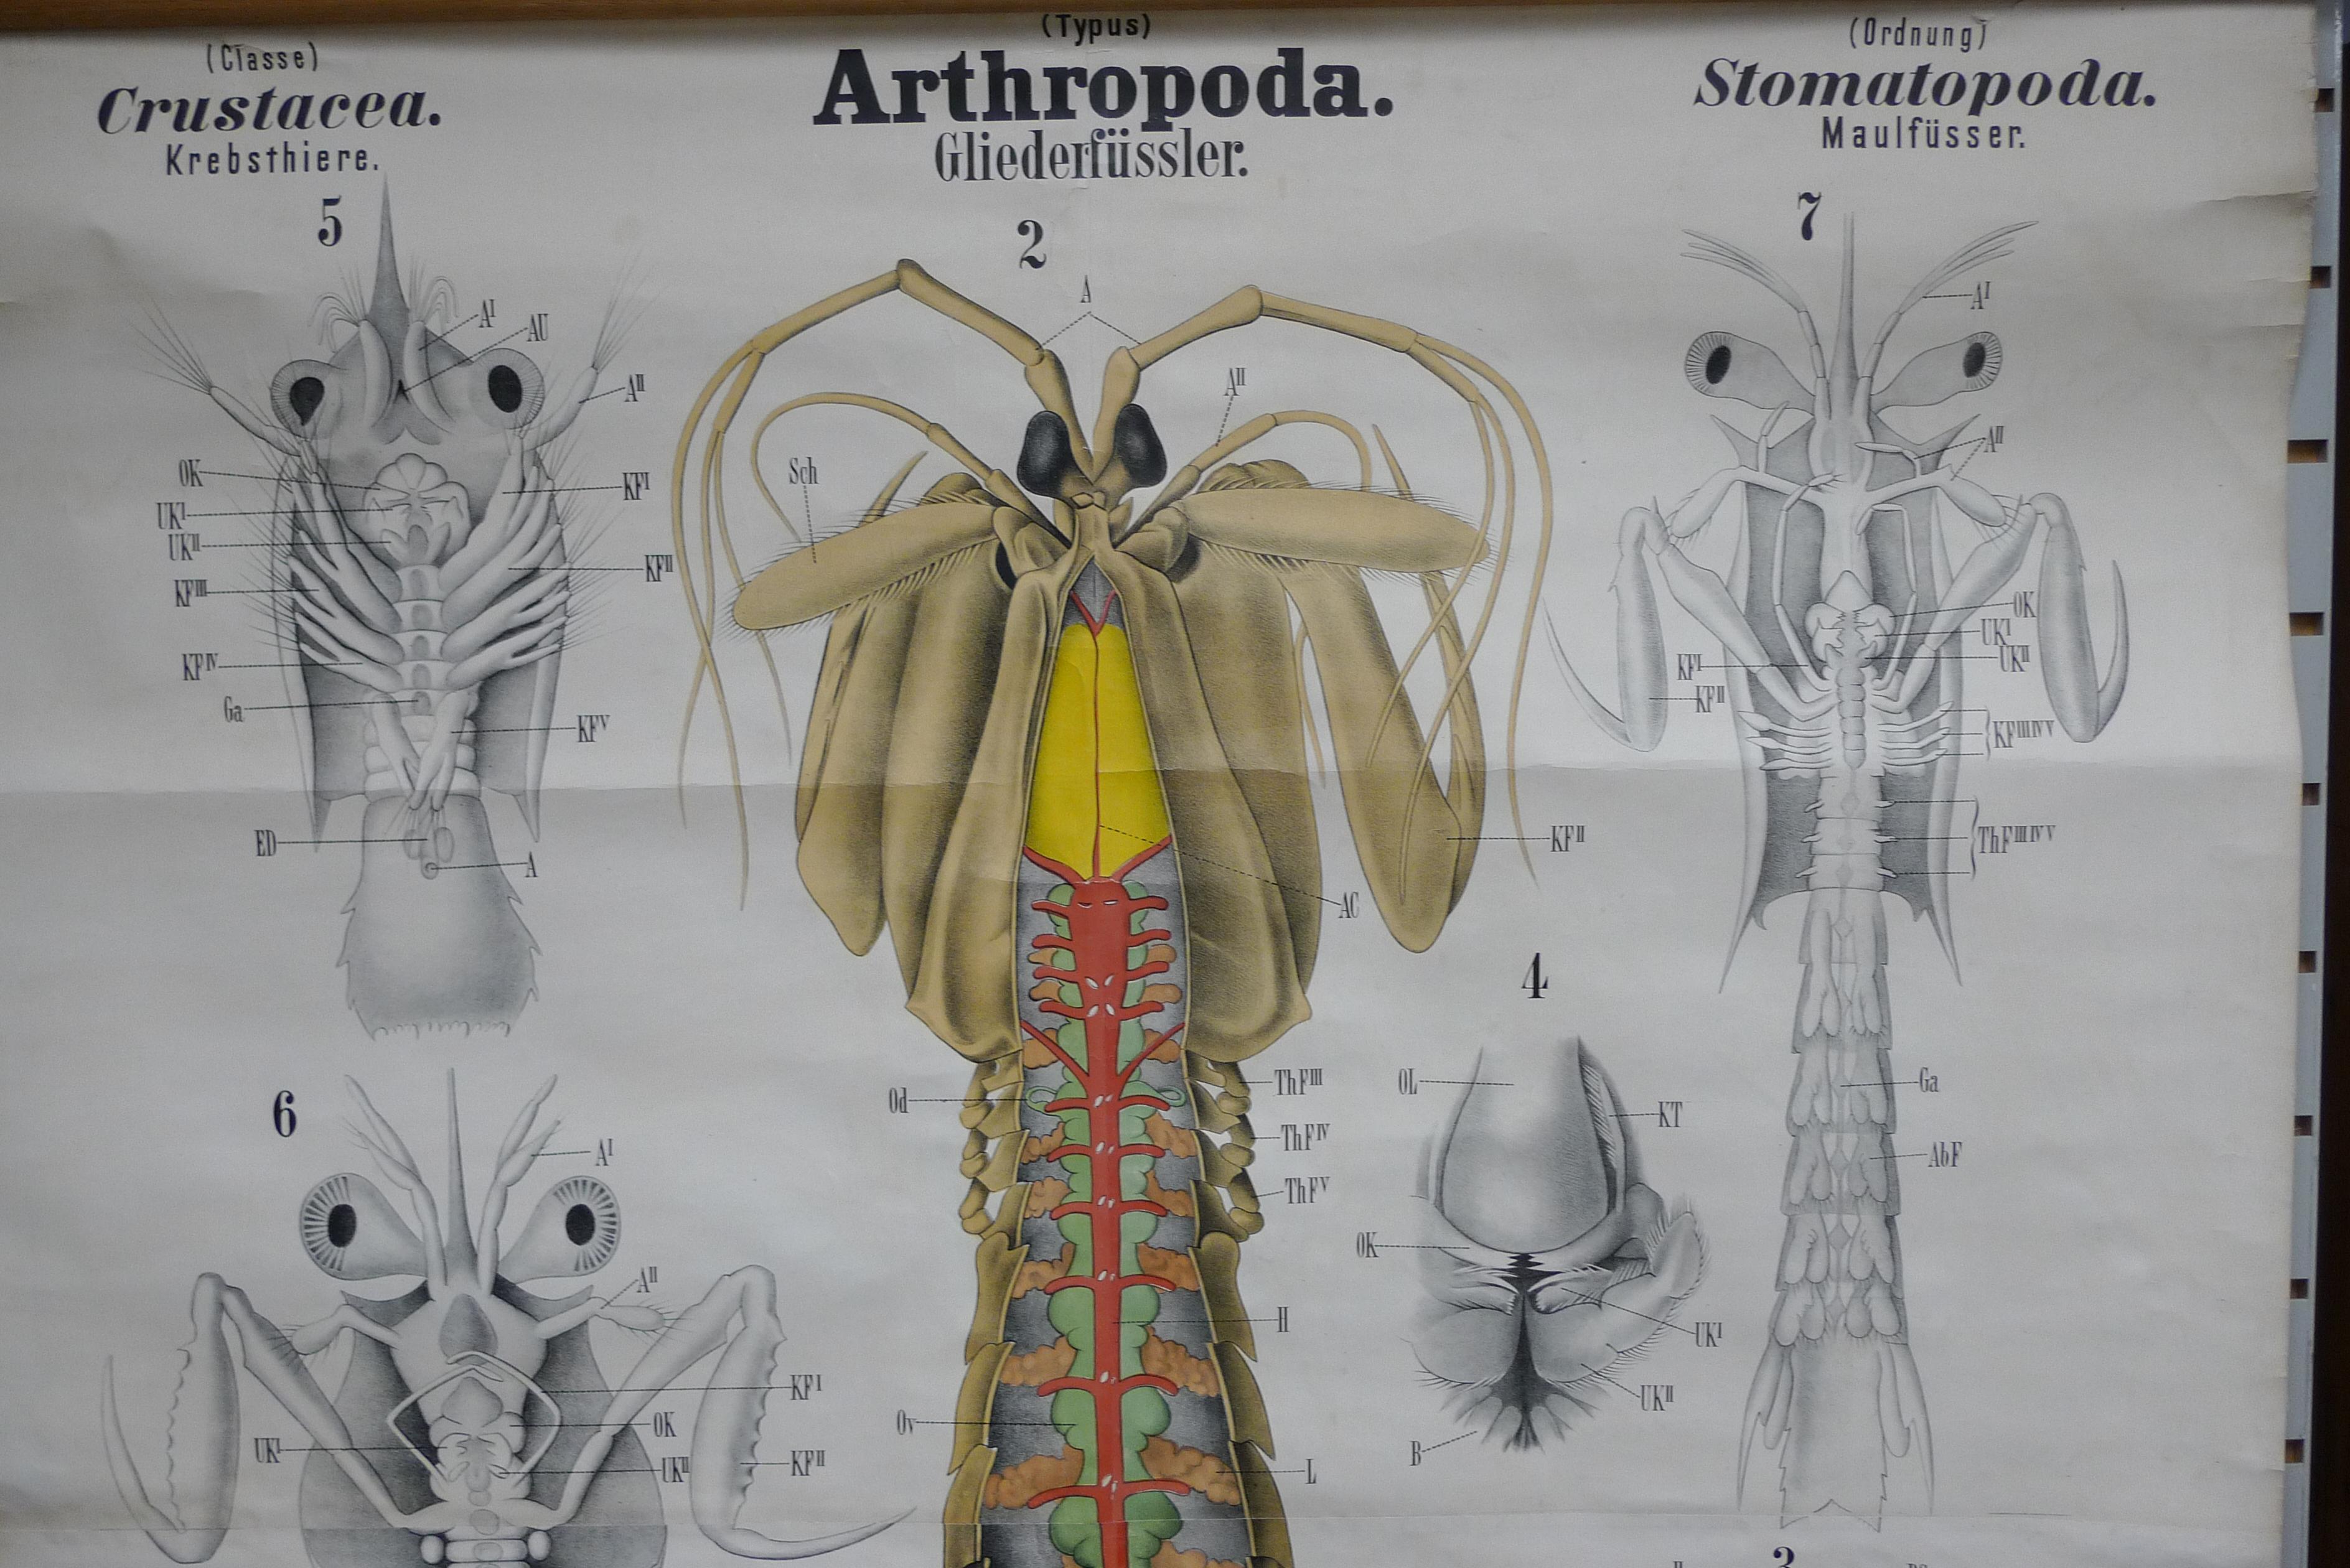 Midcentury classroom zoology map: Anthropod, aka Crustacean. Printed in Germany in German. Finely drawn, richly colorful illustrations in exacting detail. Mounted on opposing wooden rods for easy hanging and display. We are offering three similar